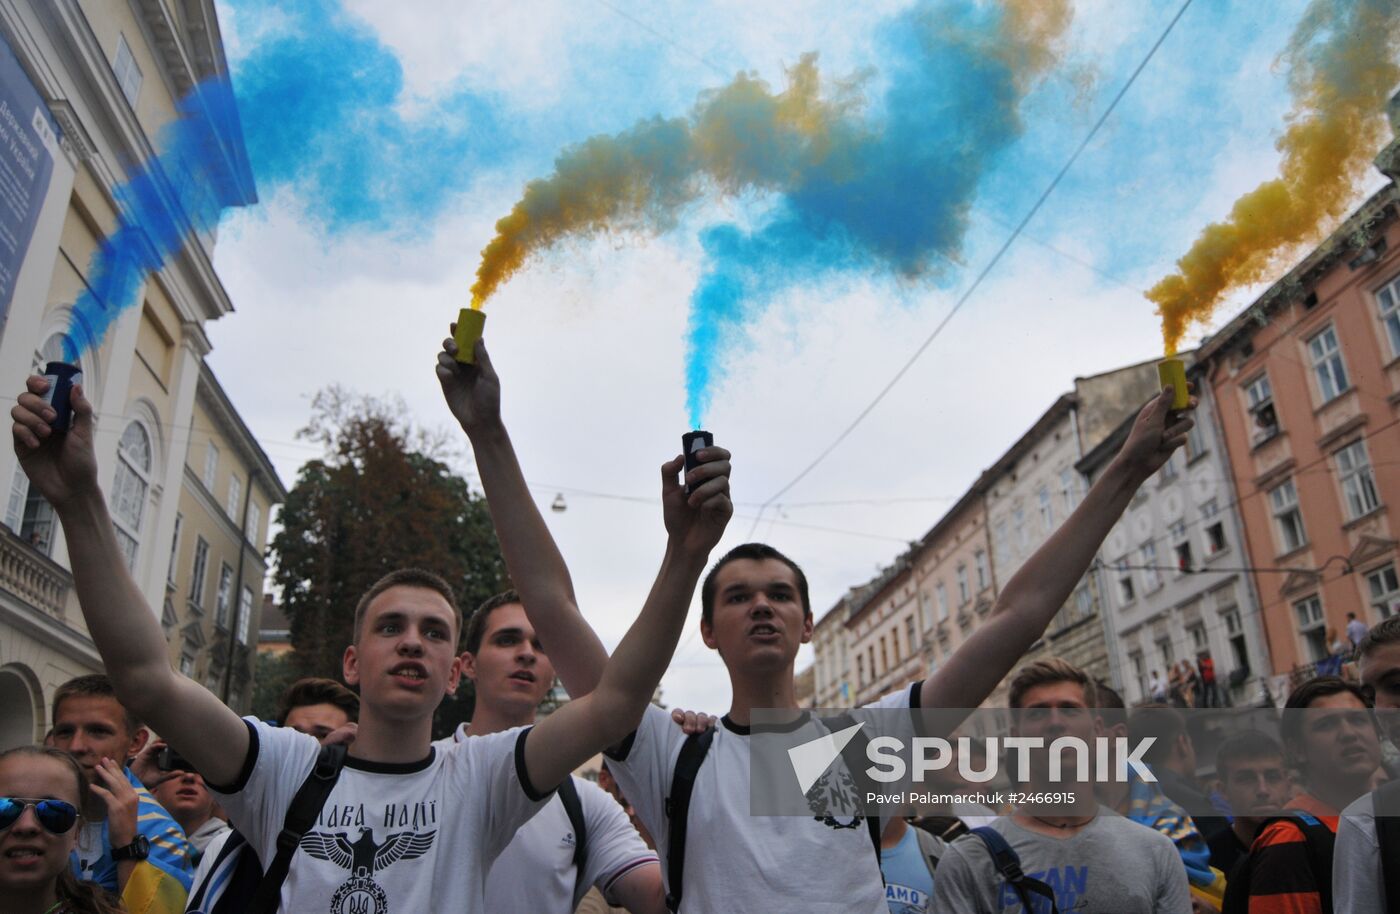 Fans in a joint march before Dynamo - Shakhtar match in Lviv